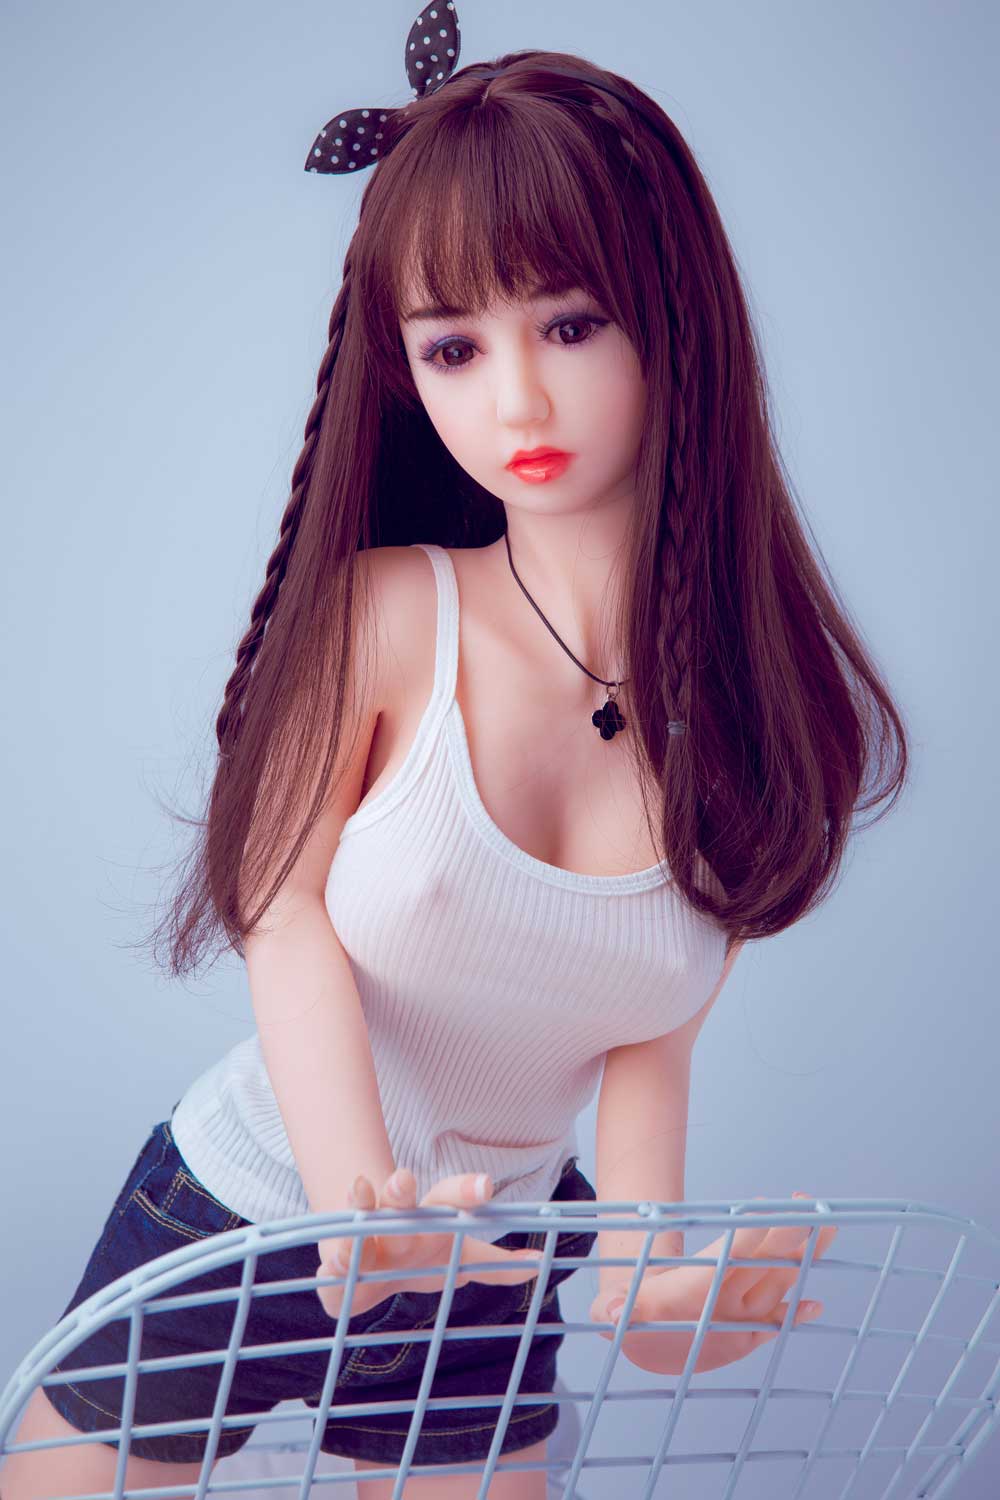 Mini sex doll with hands on the arm of the chair